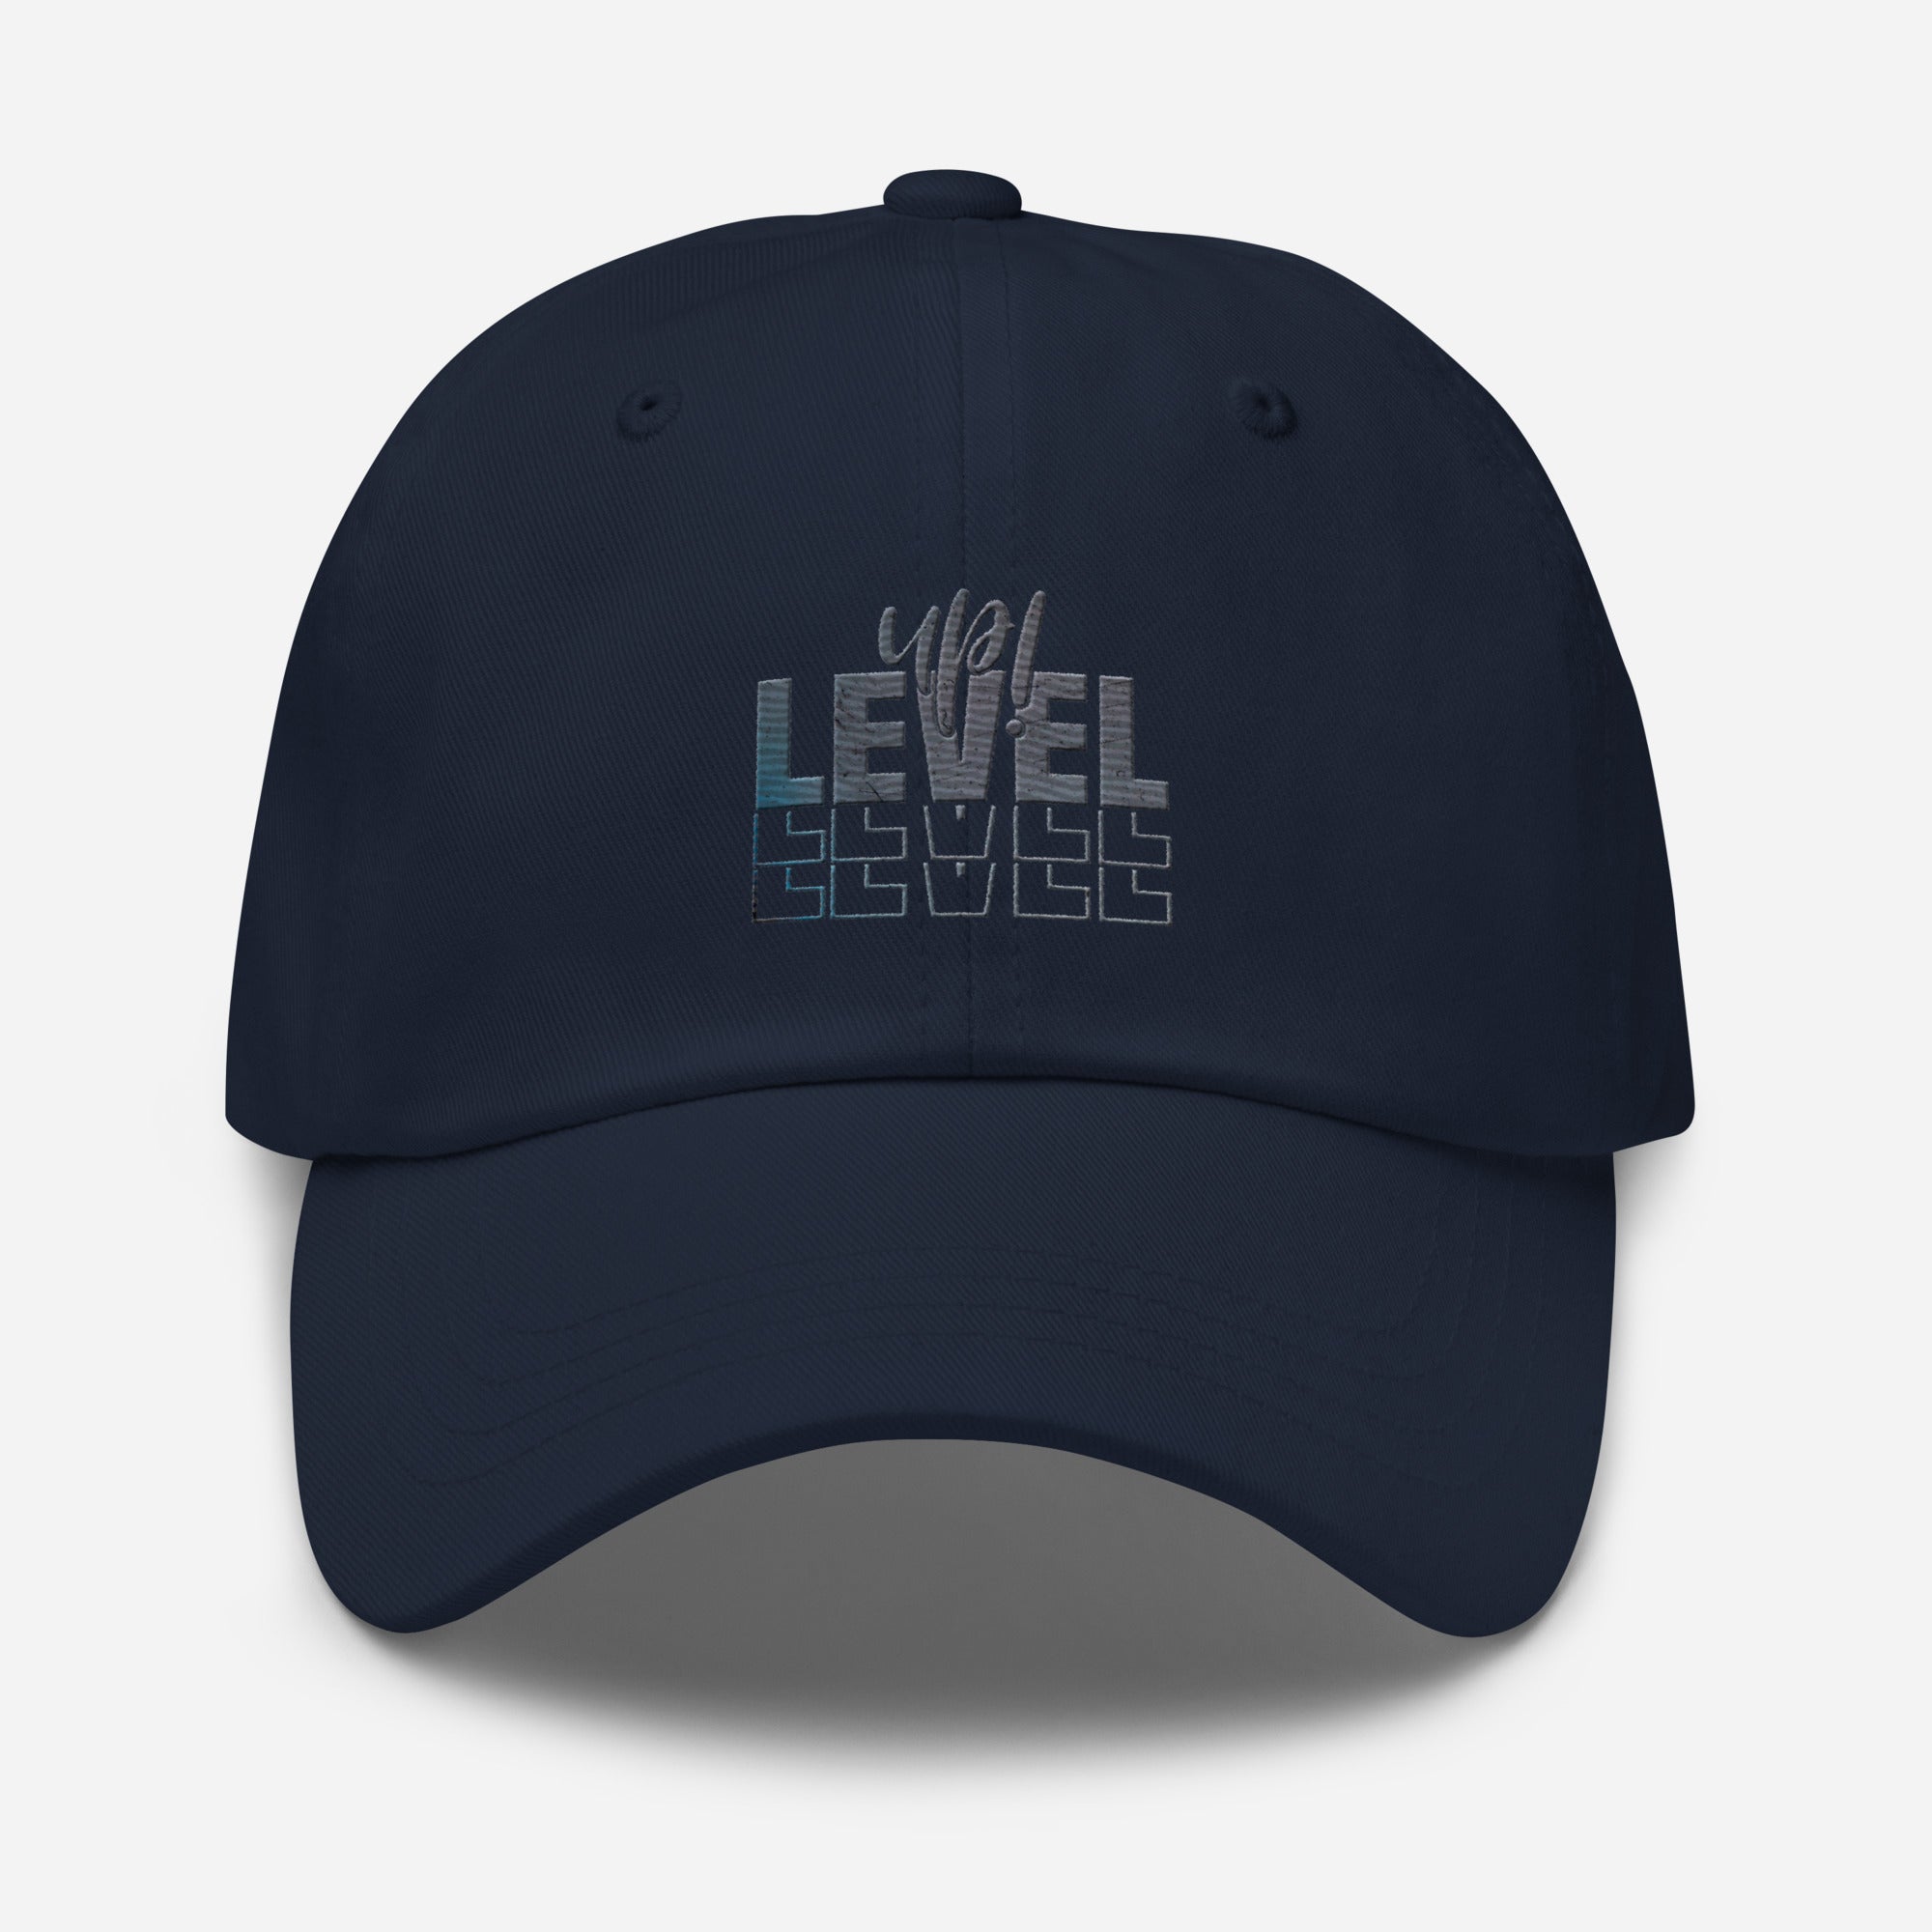 Dad hat | Level Up